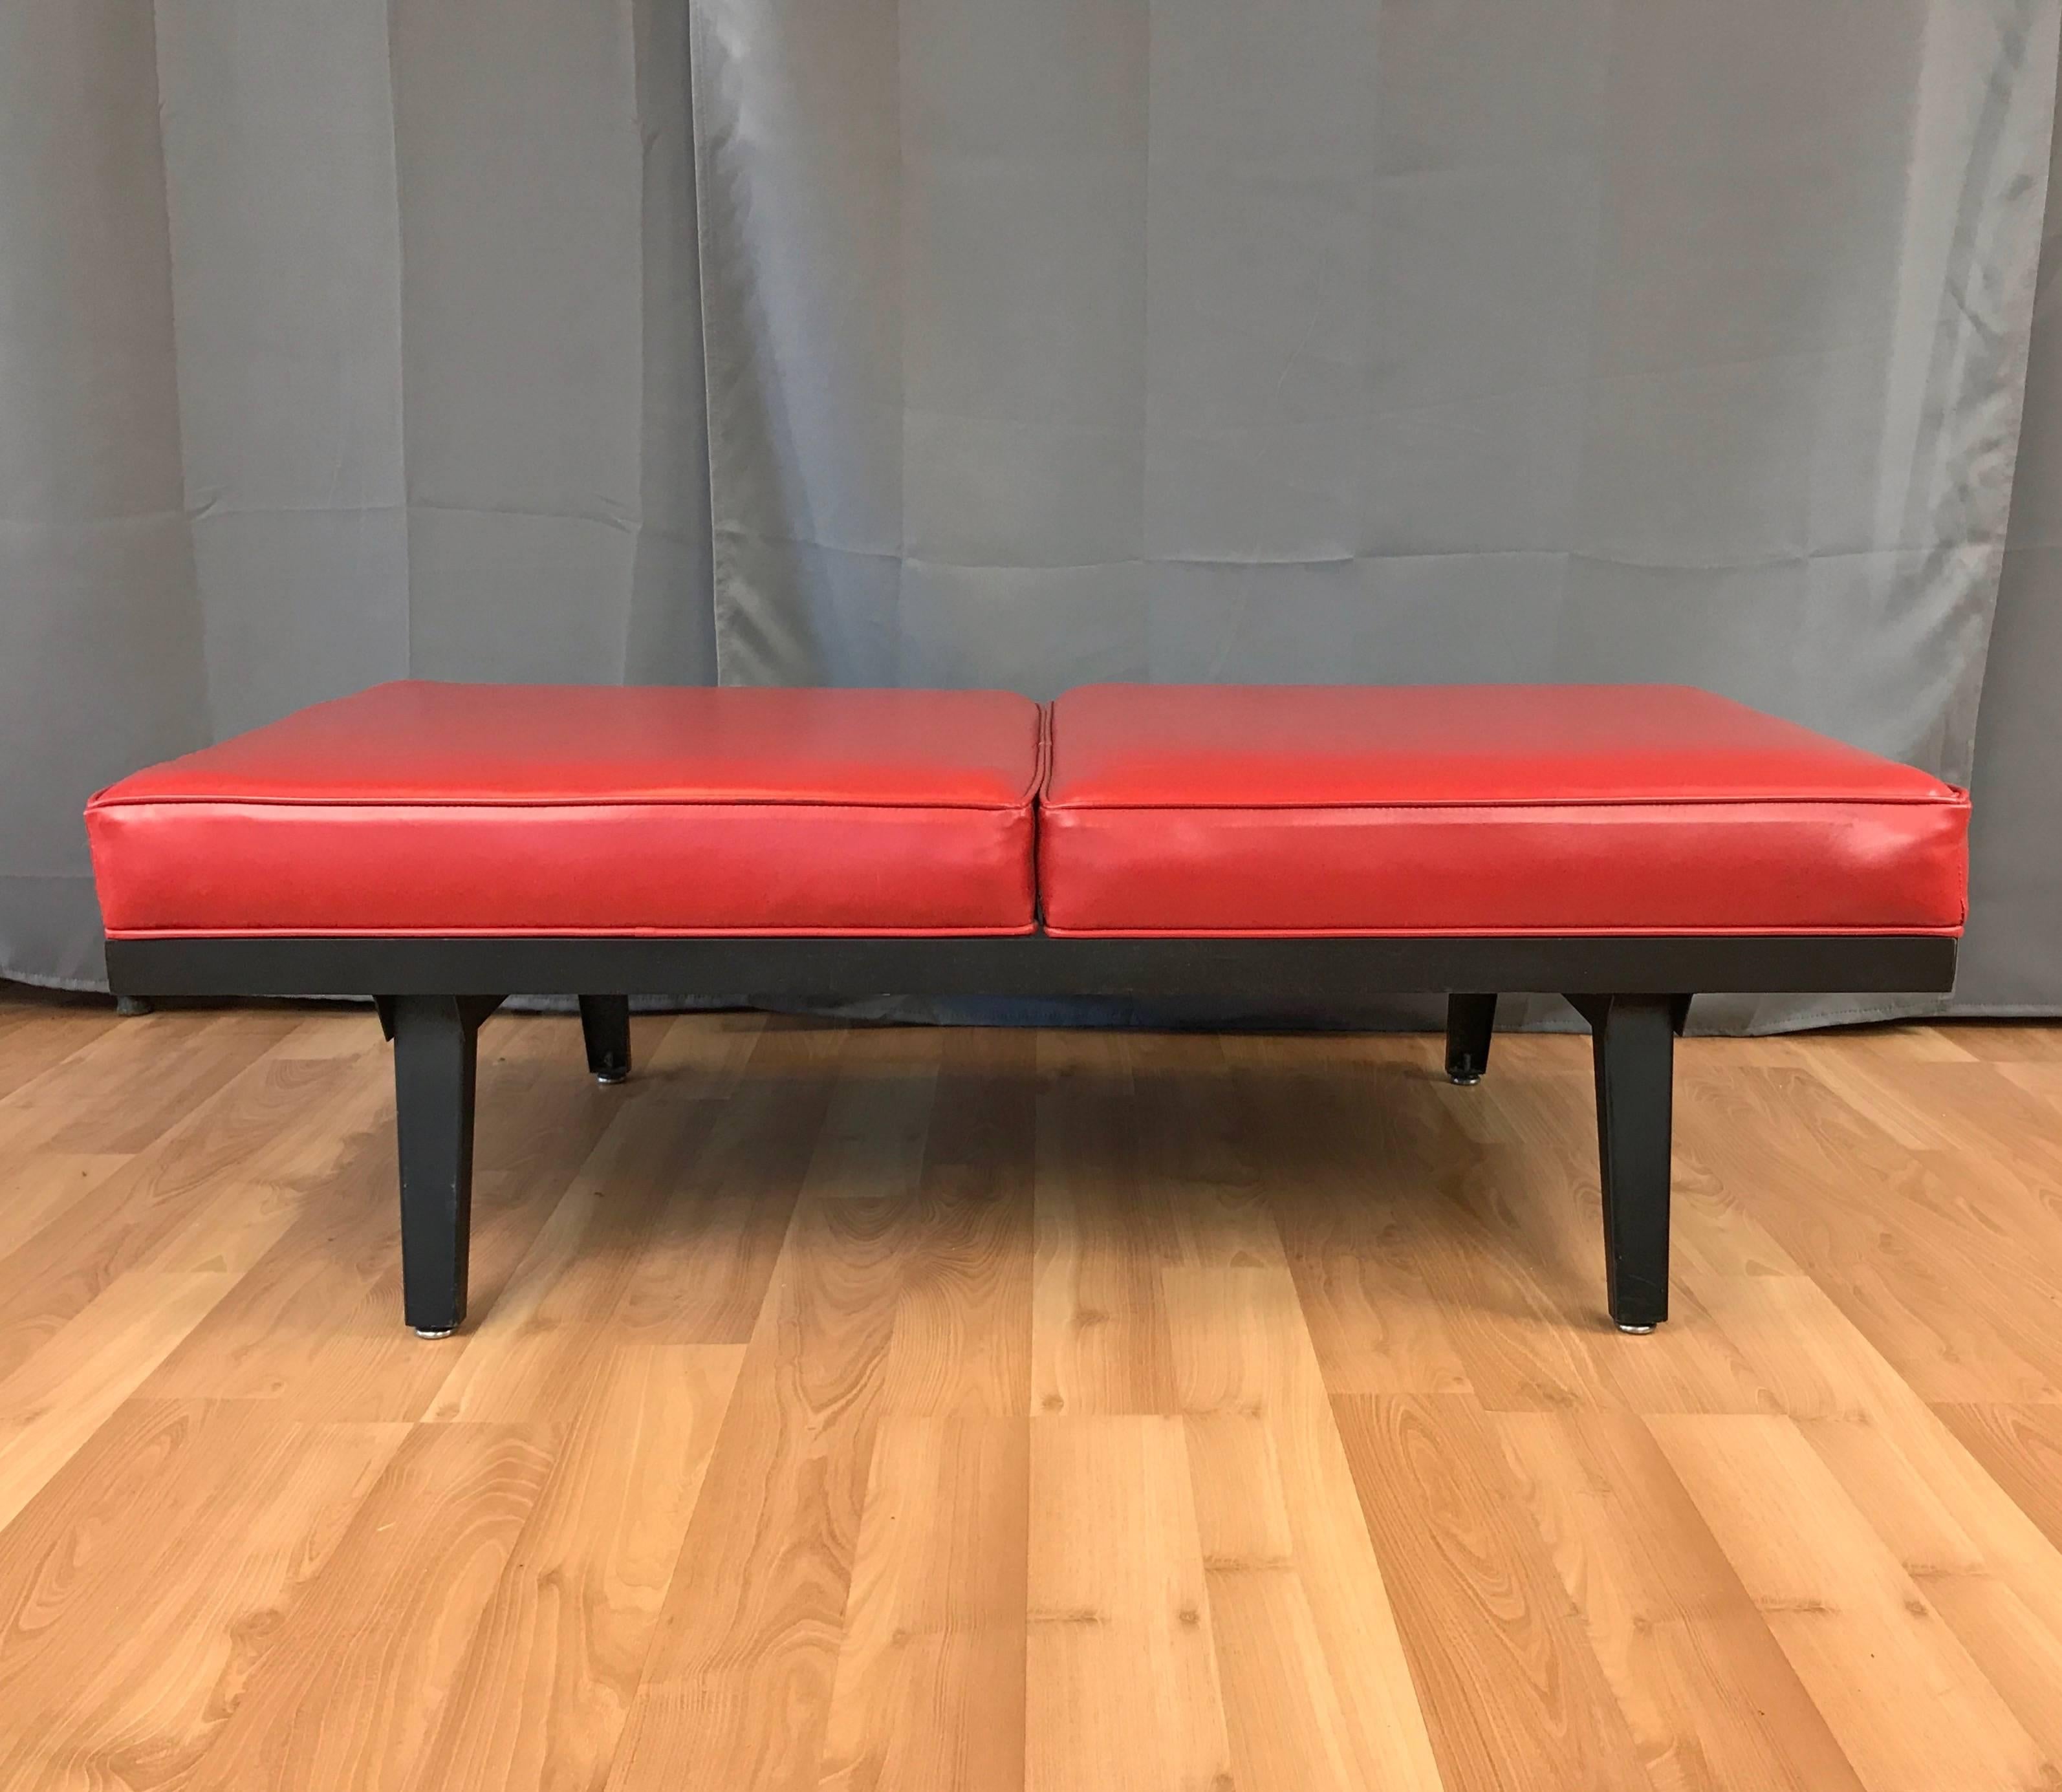 A vintage two-seat bench by George Nelson from his Steelframe series for Herman Miller.

Generously-sized cushions upholstered in original bright red vinyl. Steel and wood base and legs finished in matte black. A traffic-stopping example of